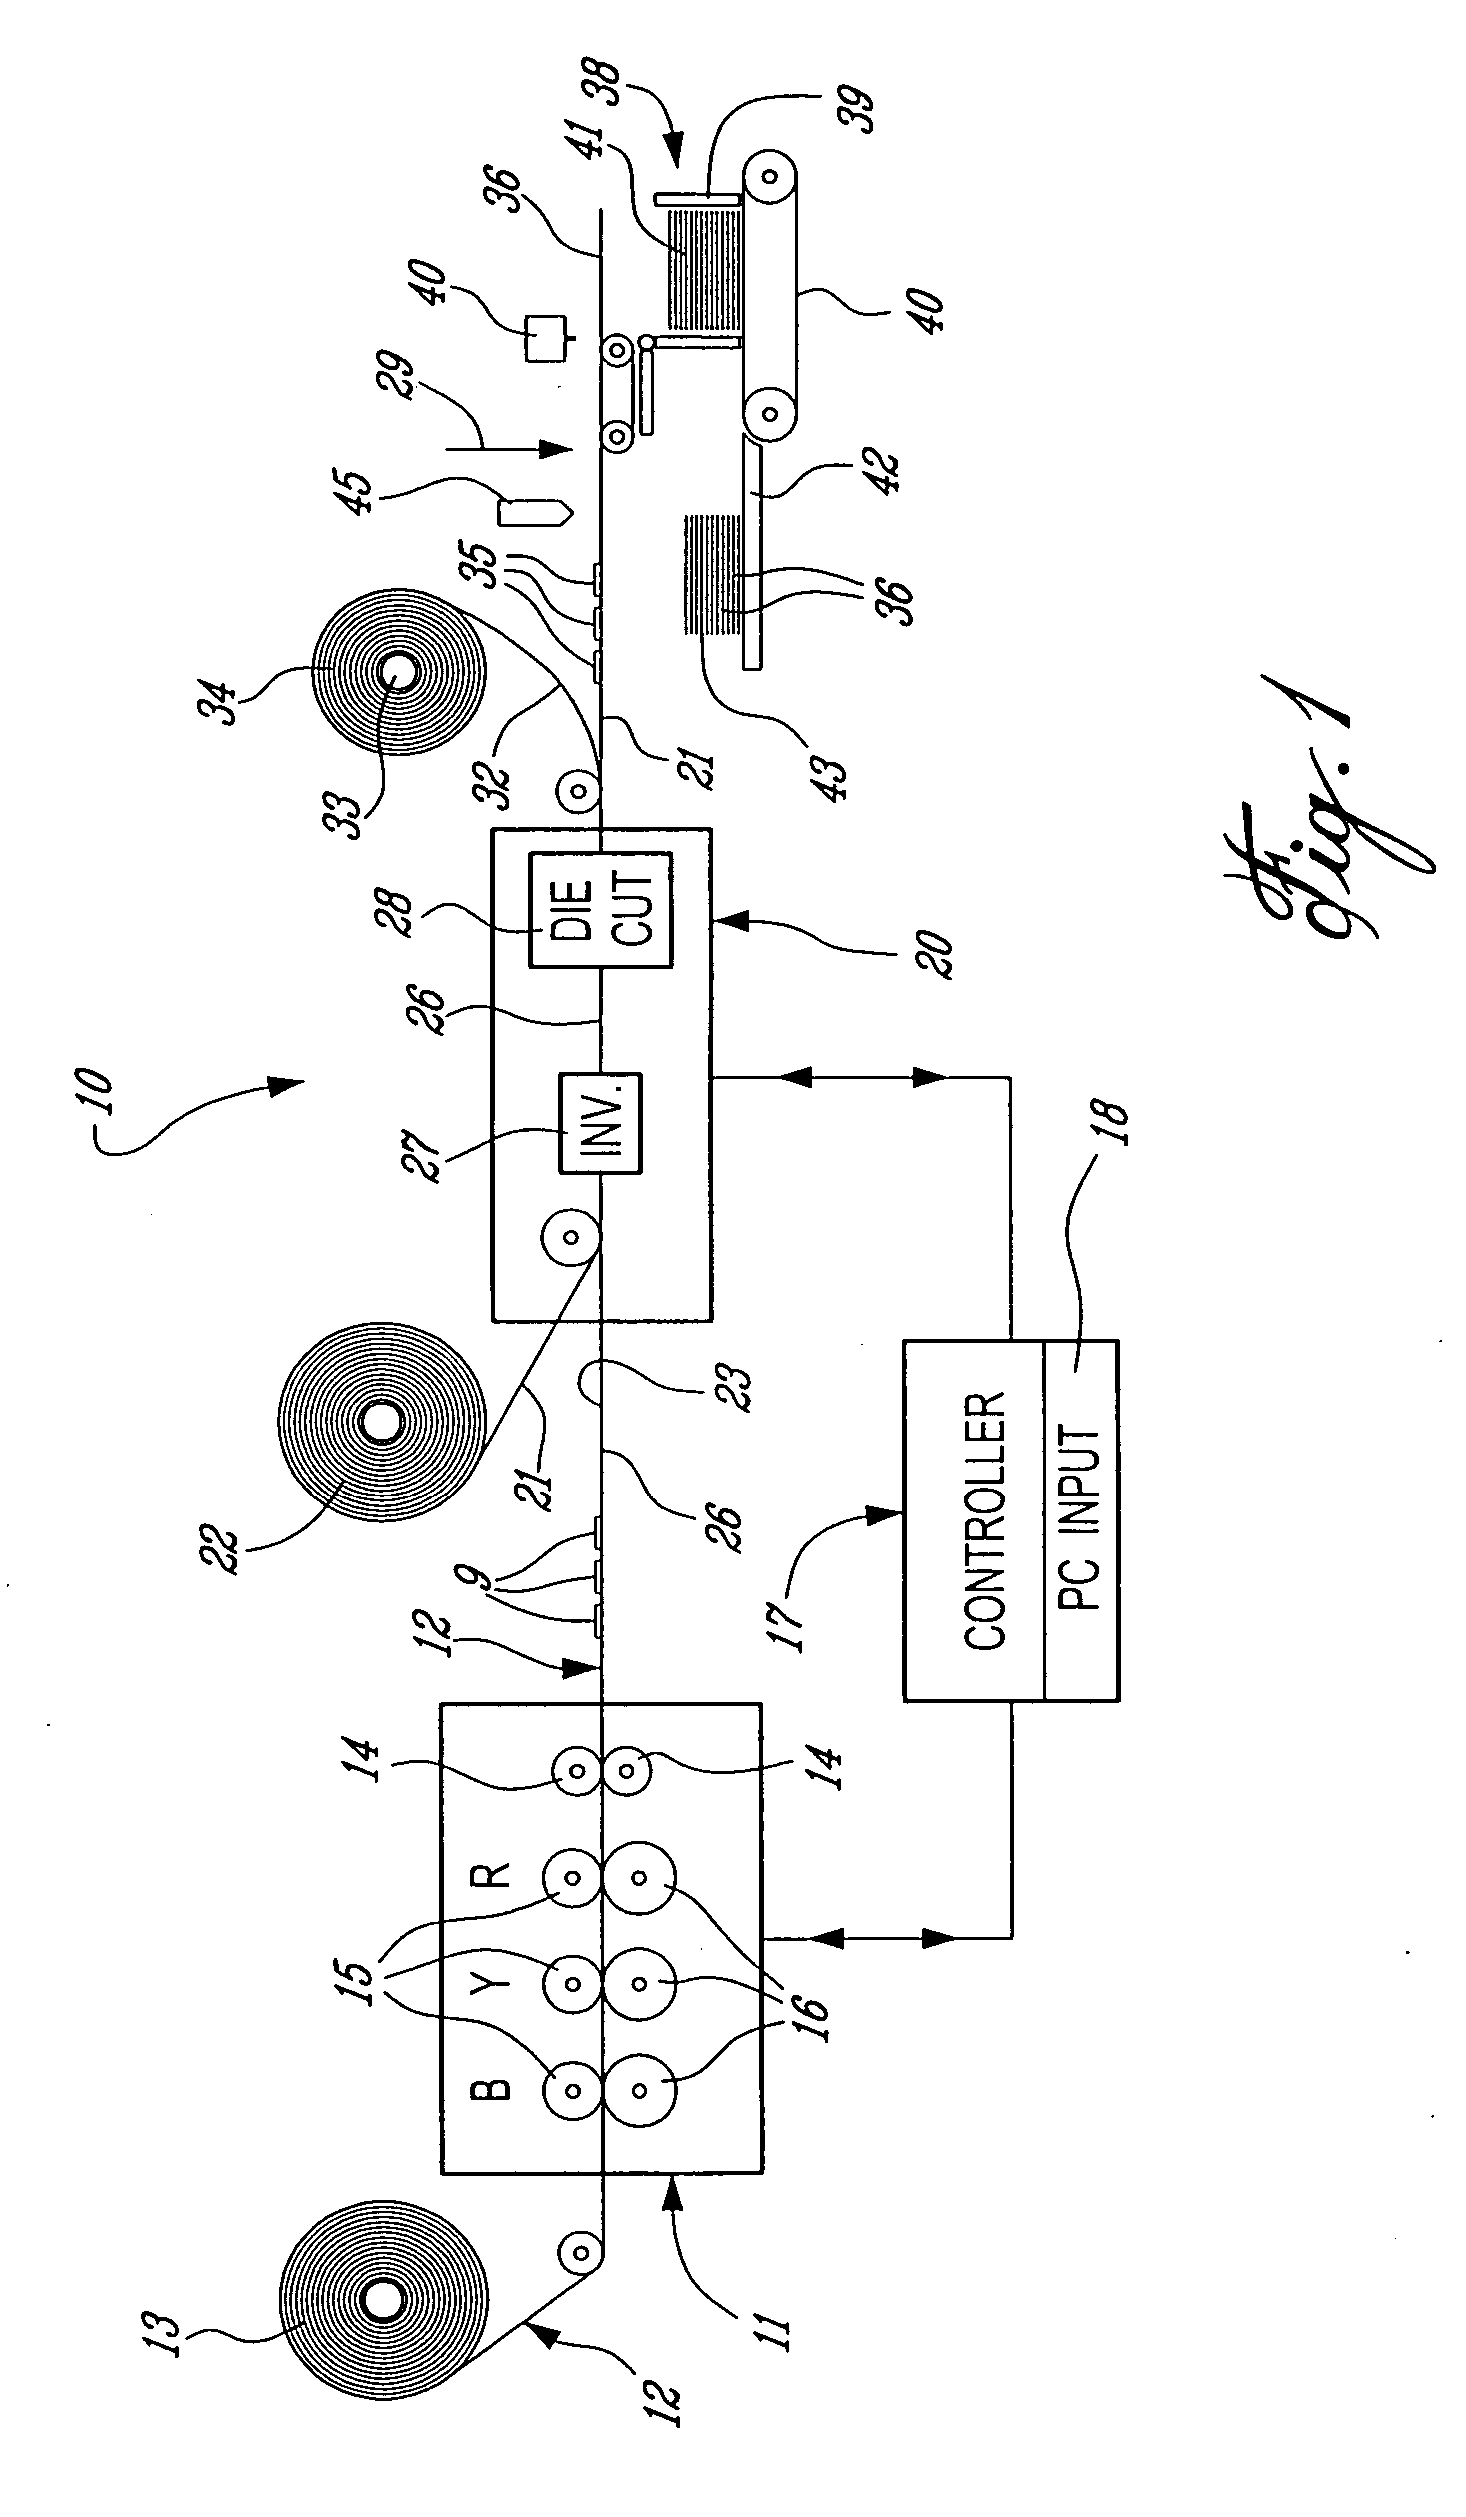 Method and system for manufacturing label kits comprised of carrier sheets having labels of specific shape removably retained thereon